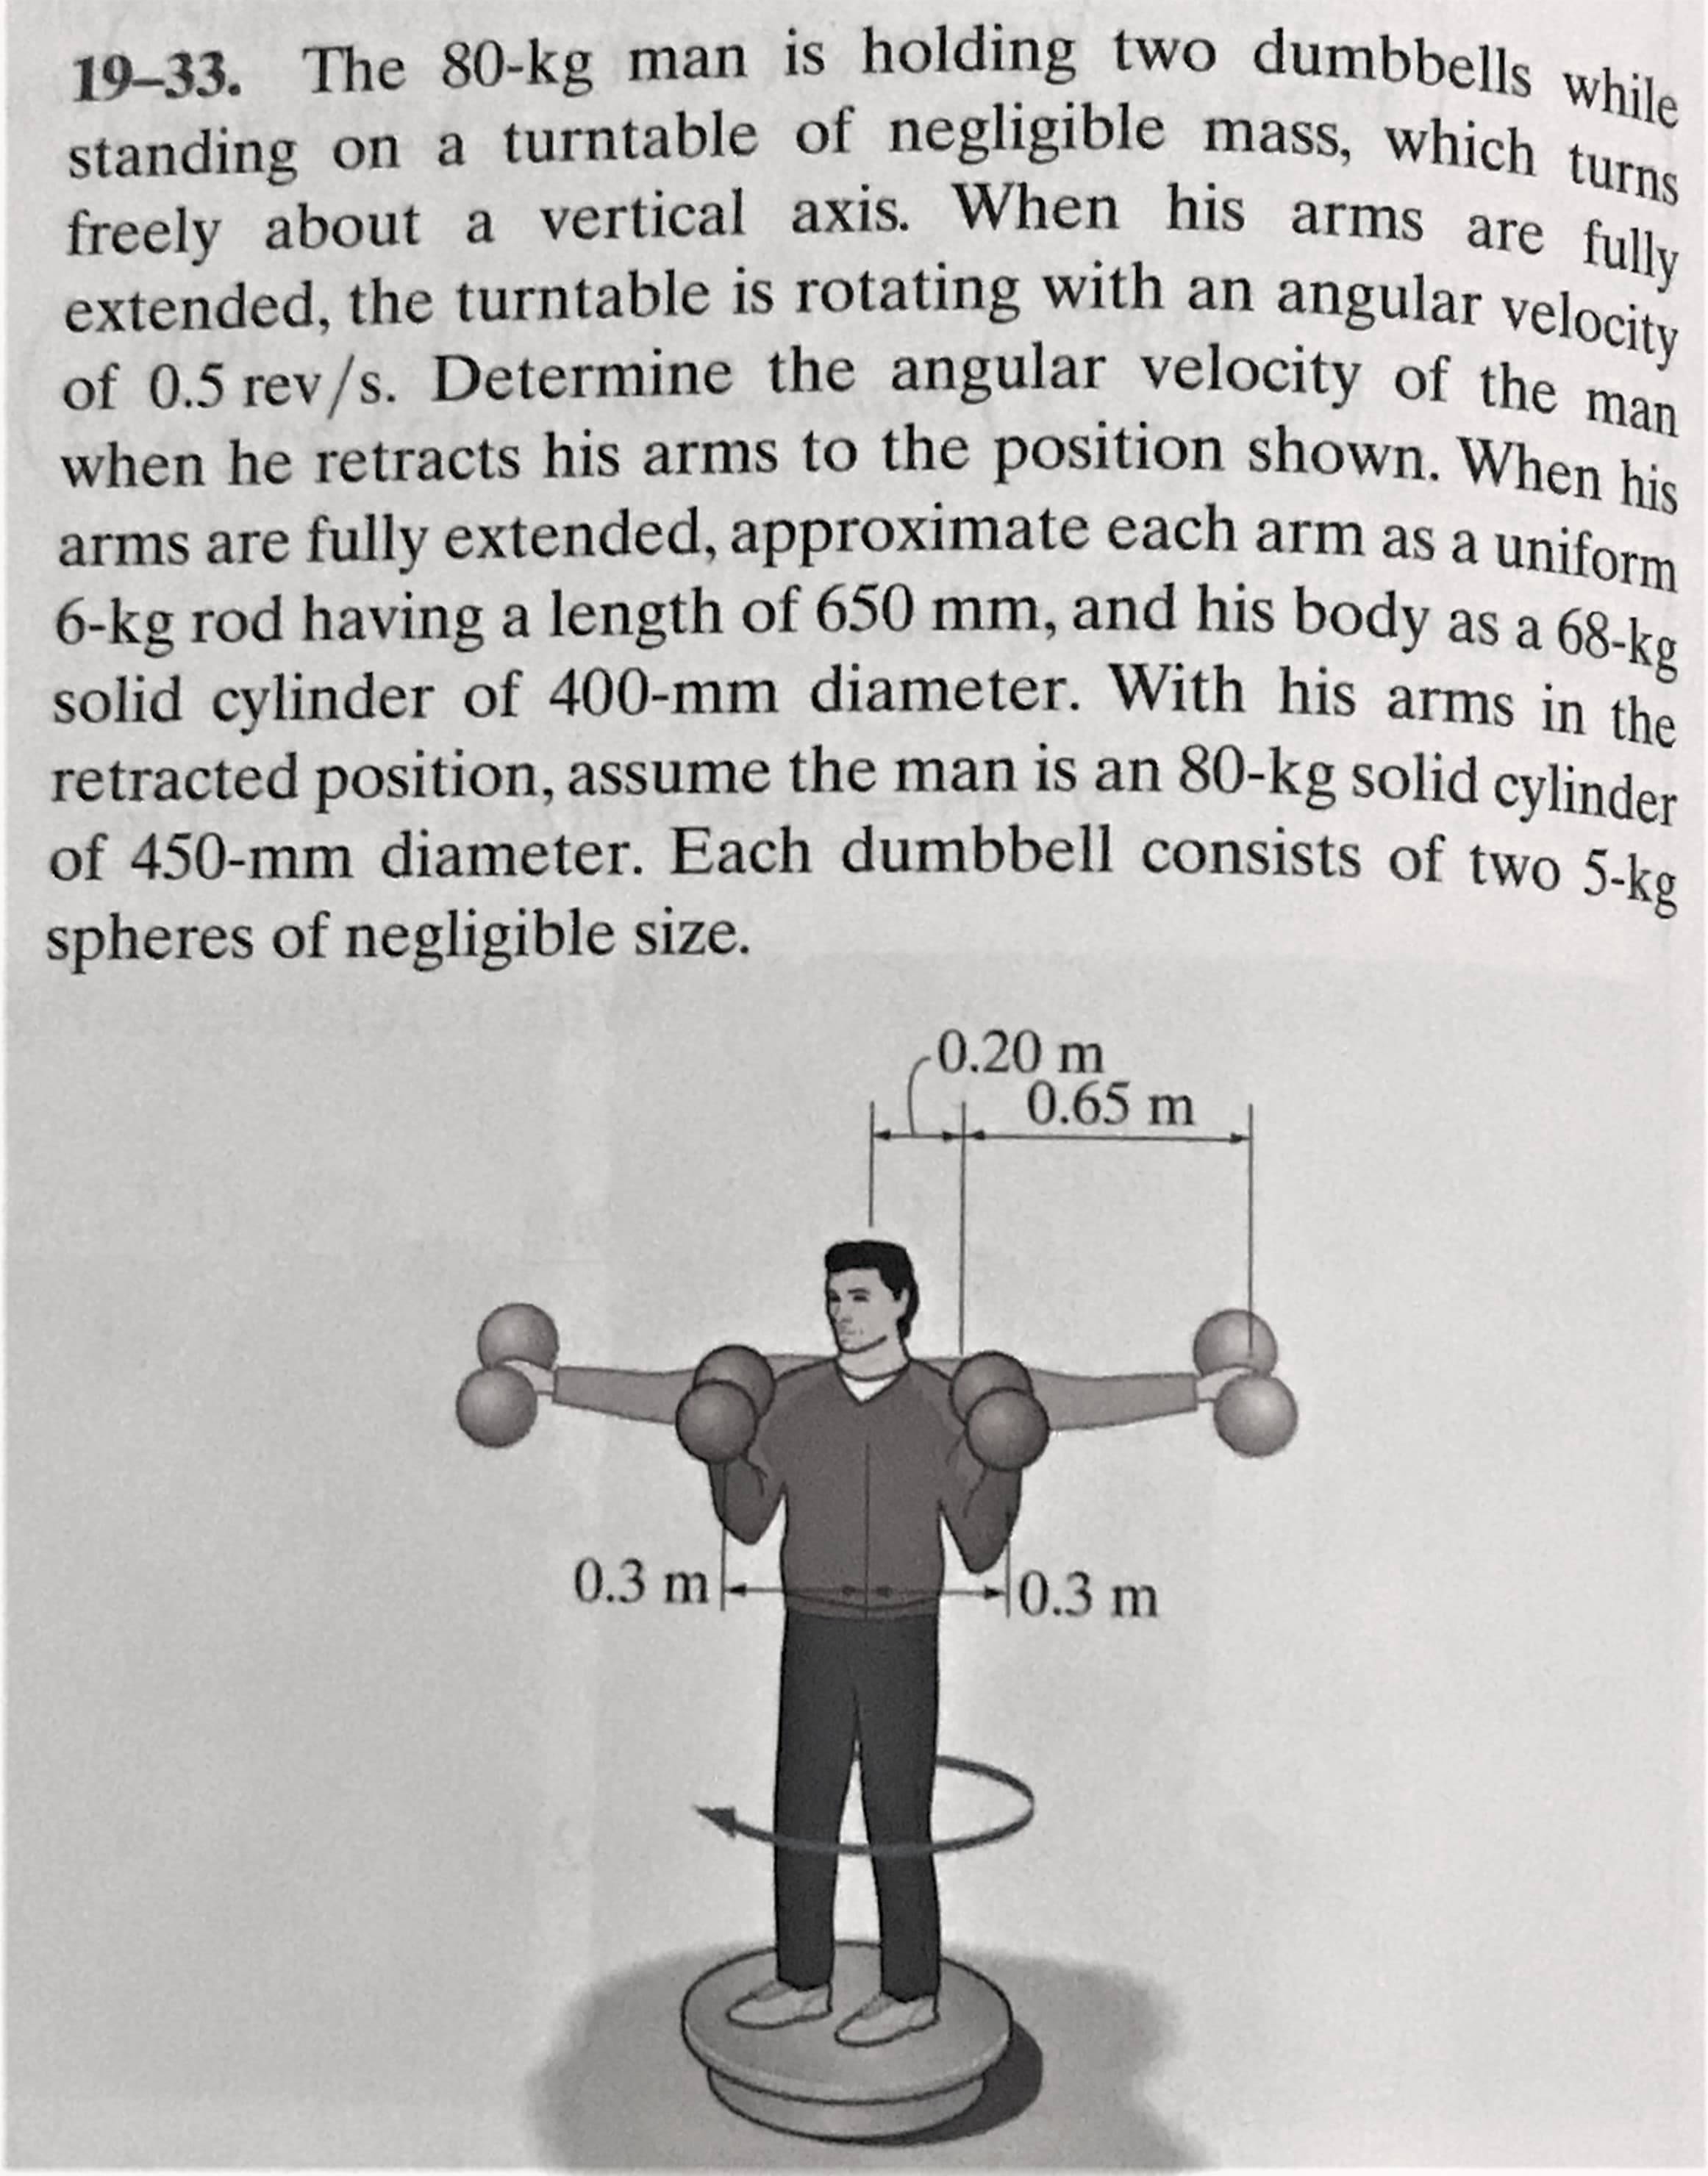 19-33. The 80-kg man is holding two dumbbells wh
standing on a turntable of negligible mass, which turns
freely about a vertical axis. When his arms are fully
extended, the turntable is rotating with an angular velocity
of 0.5 rev/s. Determine the angular velocity of the p
when he retracts his arms to the position shown. When his
arms are fully extended, approximate each arm as a uniform
6-kg rod having a length of 650 mm, and his body as a 68-ko
solid cylinder of 400-mm diameter. With his arms in the
retracted position, assume the man is an 80-kg solid cylinder
of 450-mm diameter. Each dumbbell consists of two 5-ke
spheres of negligible size.
0.20 m
0.65 m
0.3 m
0.3 m
